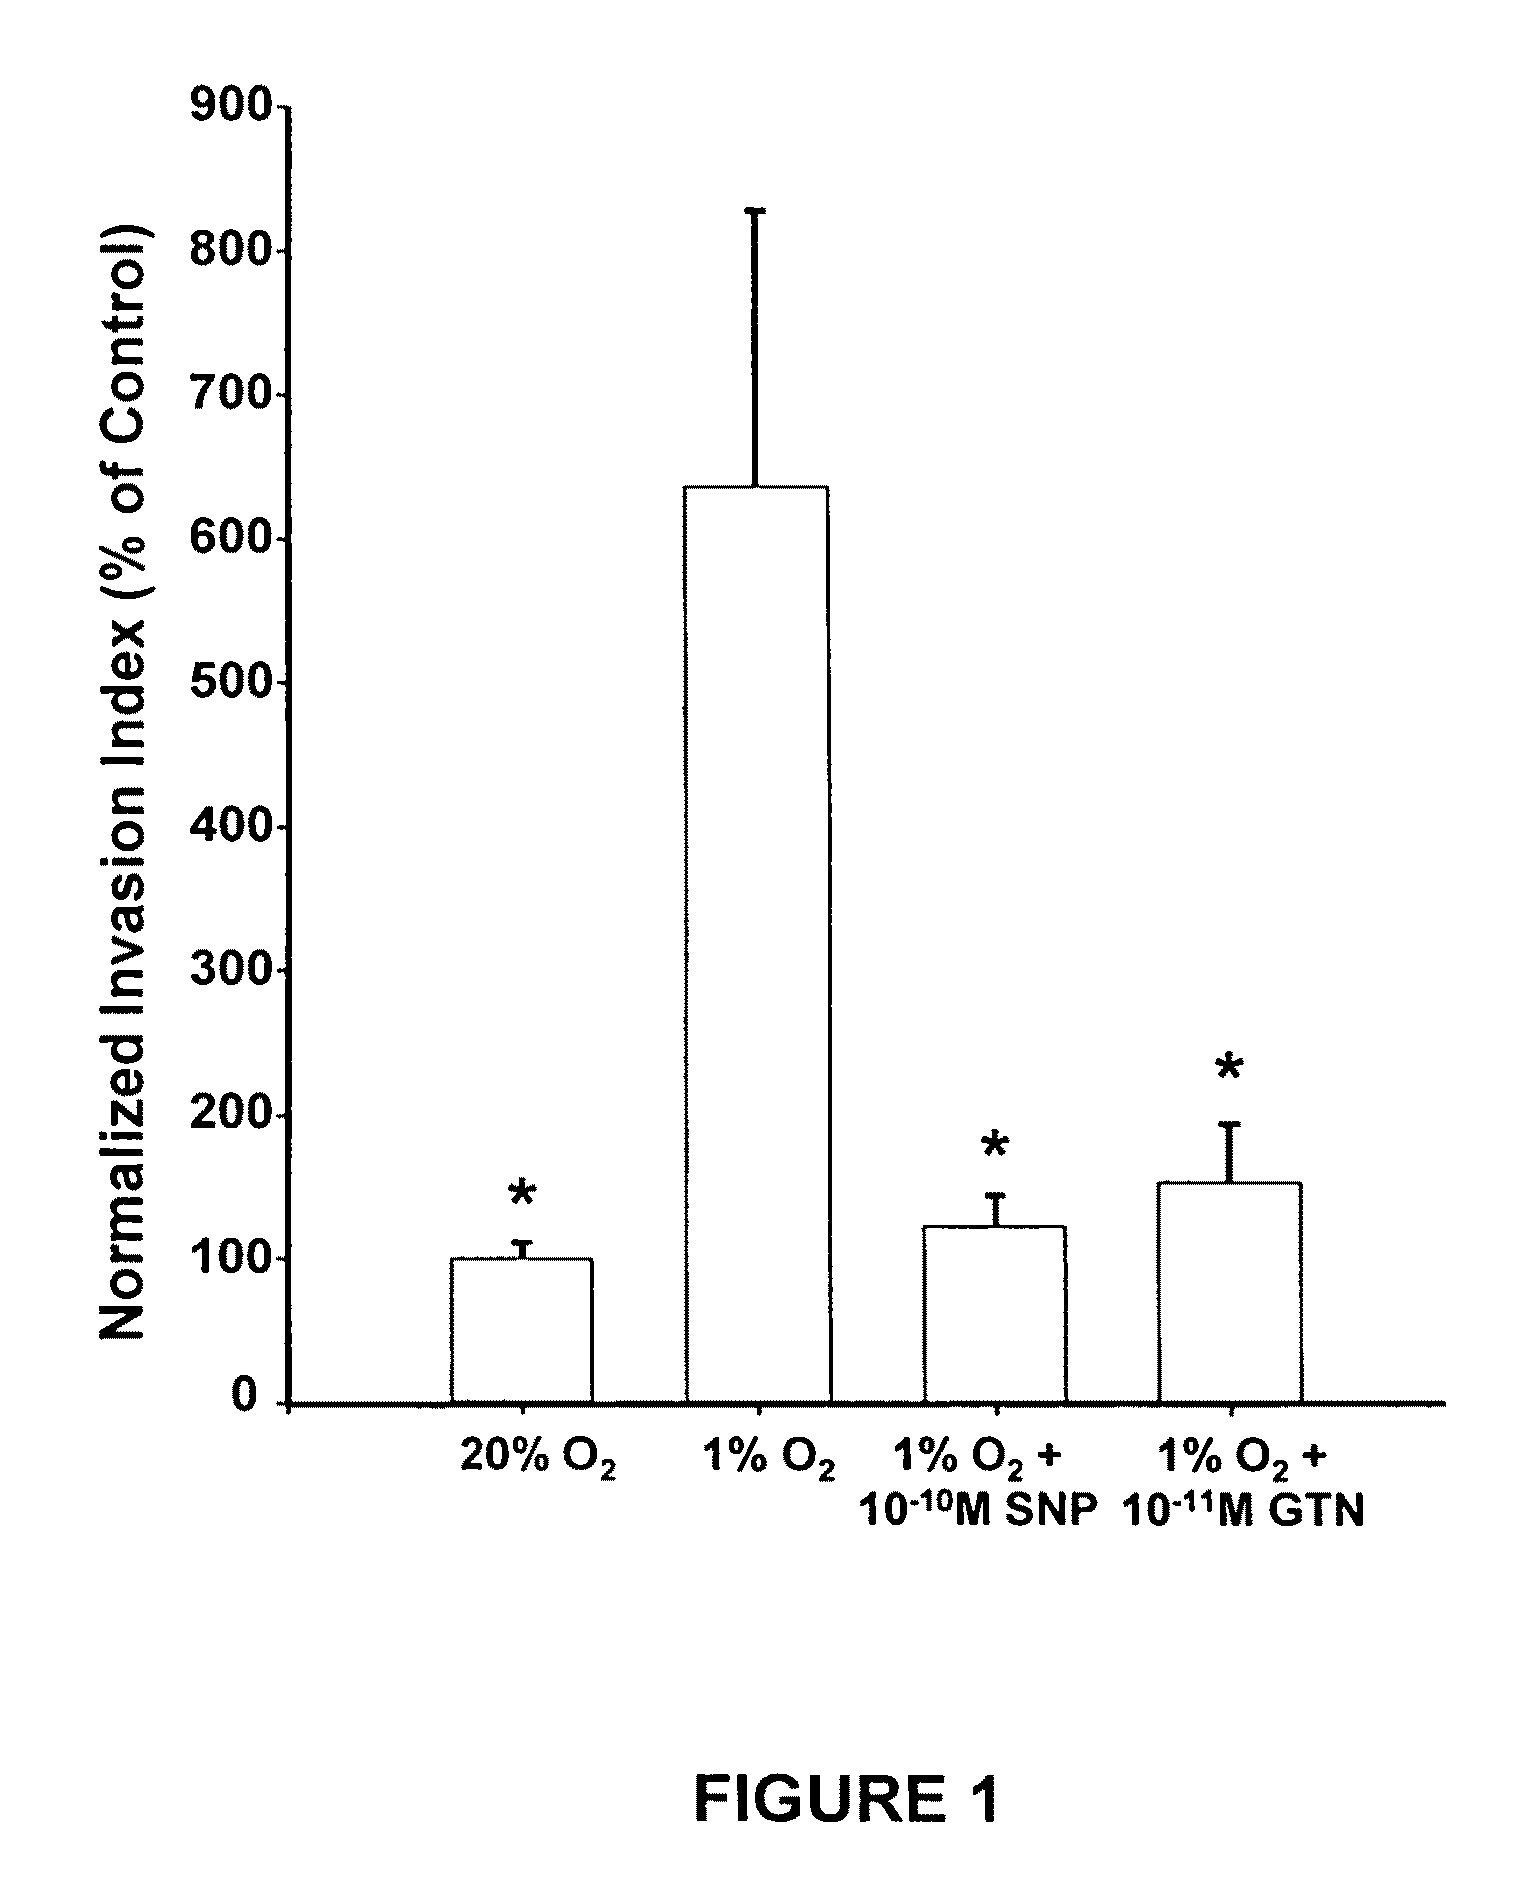 Formulations and methods of using nitric oxide mimetics in cancer treatment